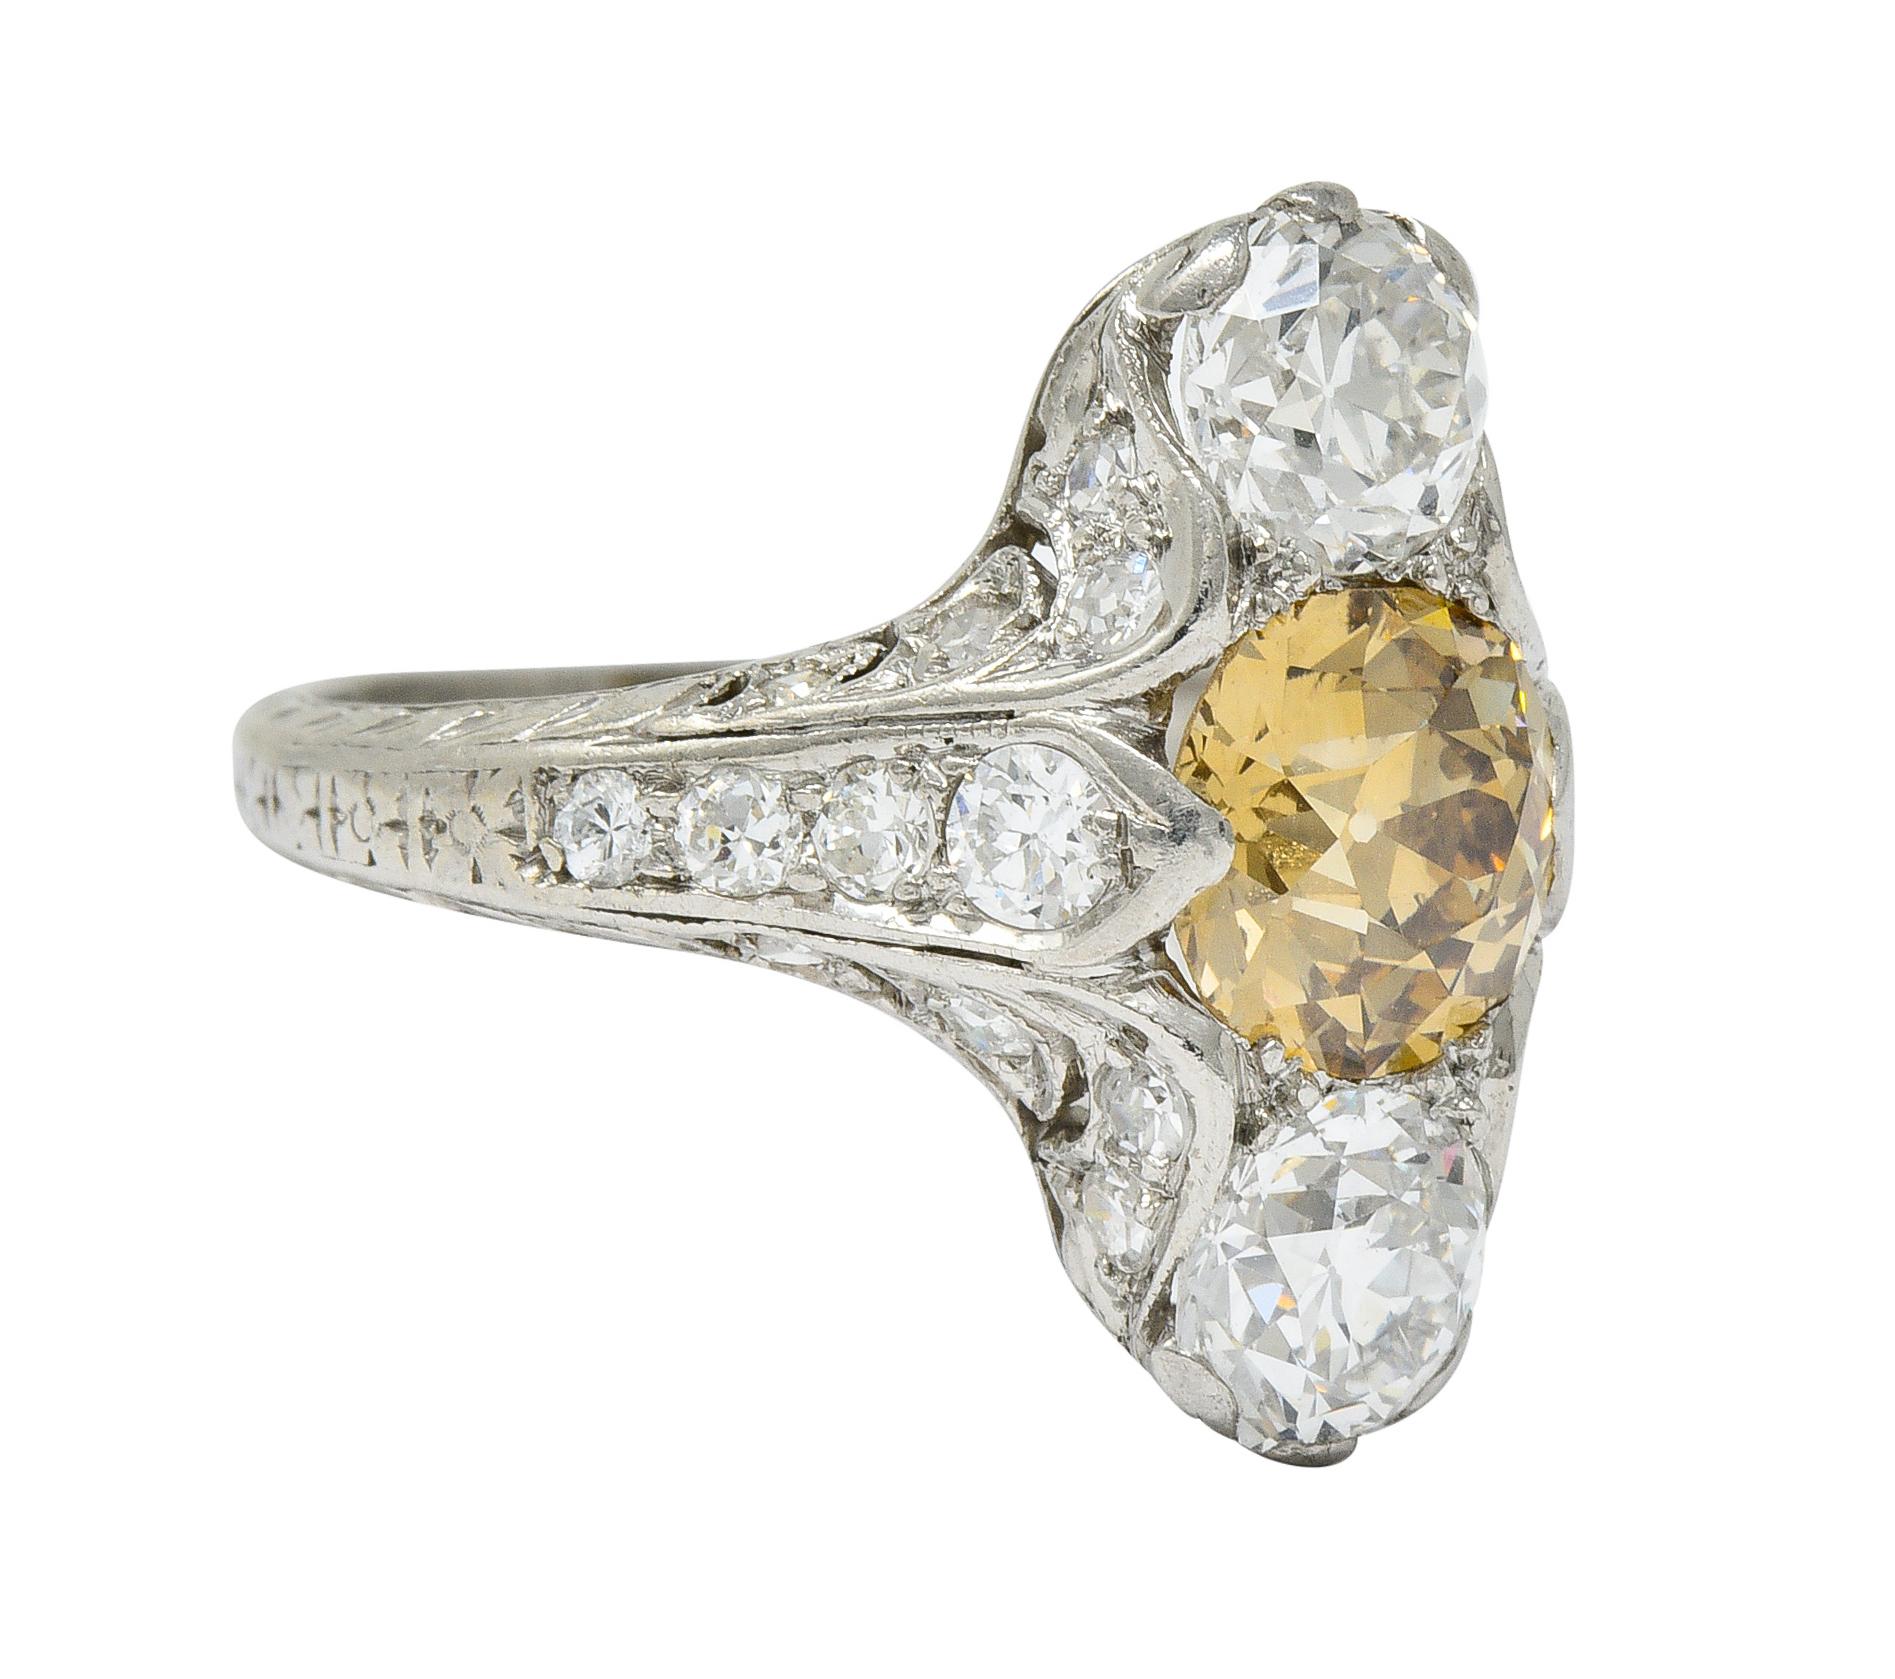 Dinner style ring features ornate scrolling with deeply engraved foliate and orange blossoms partially down shank

Centering a fancy orangey-brown old European cut diamond weighing approximately 1.07 carats with VS1 clarity

Flanked North and South